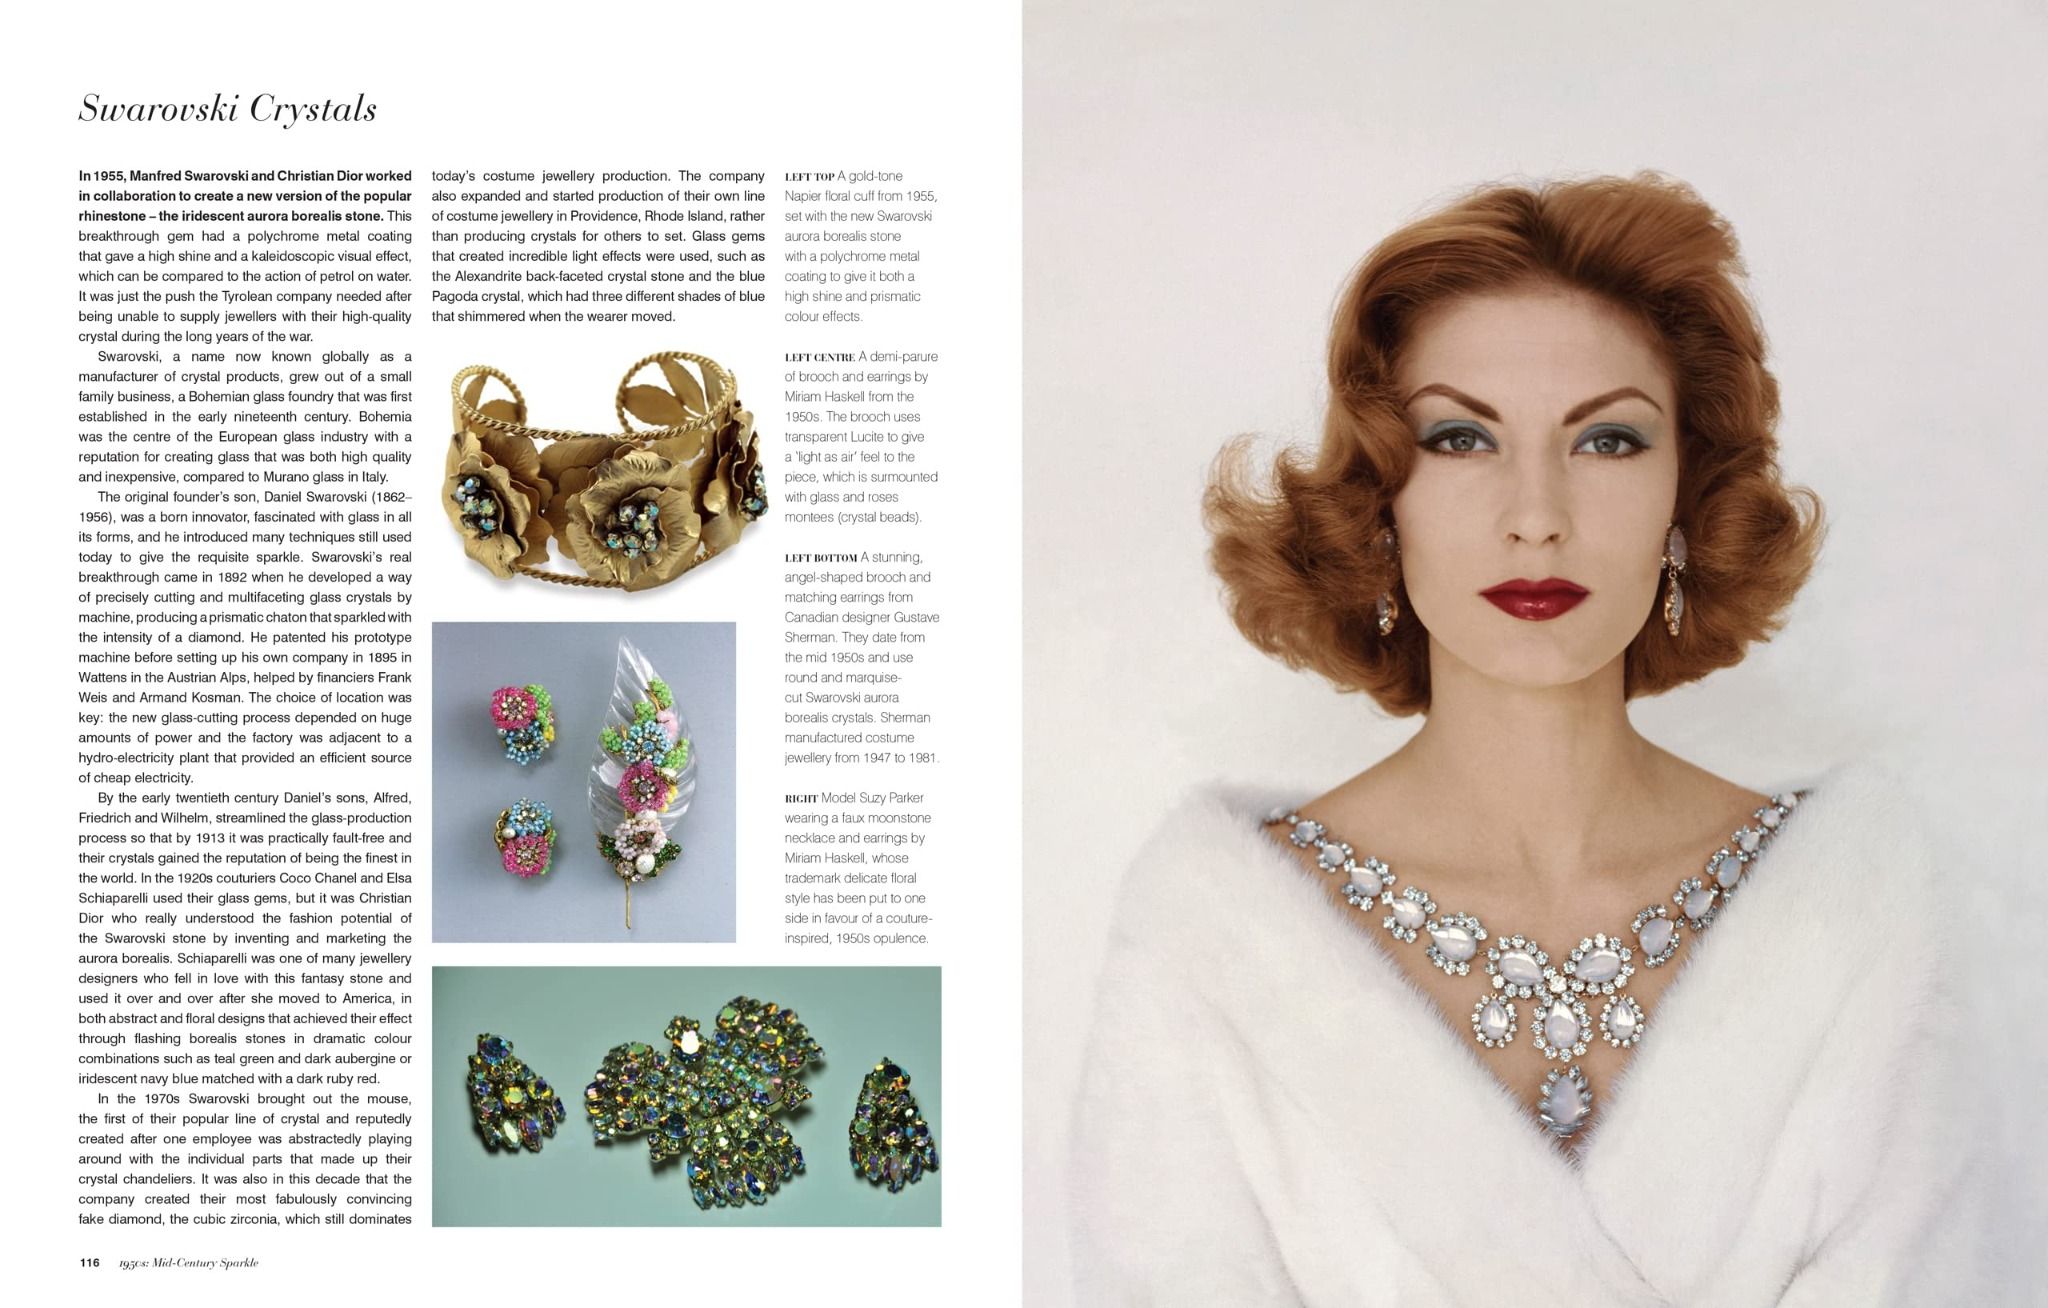  Vintage Jewellery : Collecting and wearing designer classics 